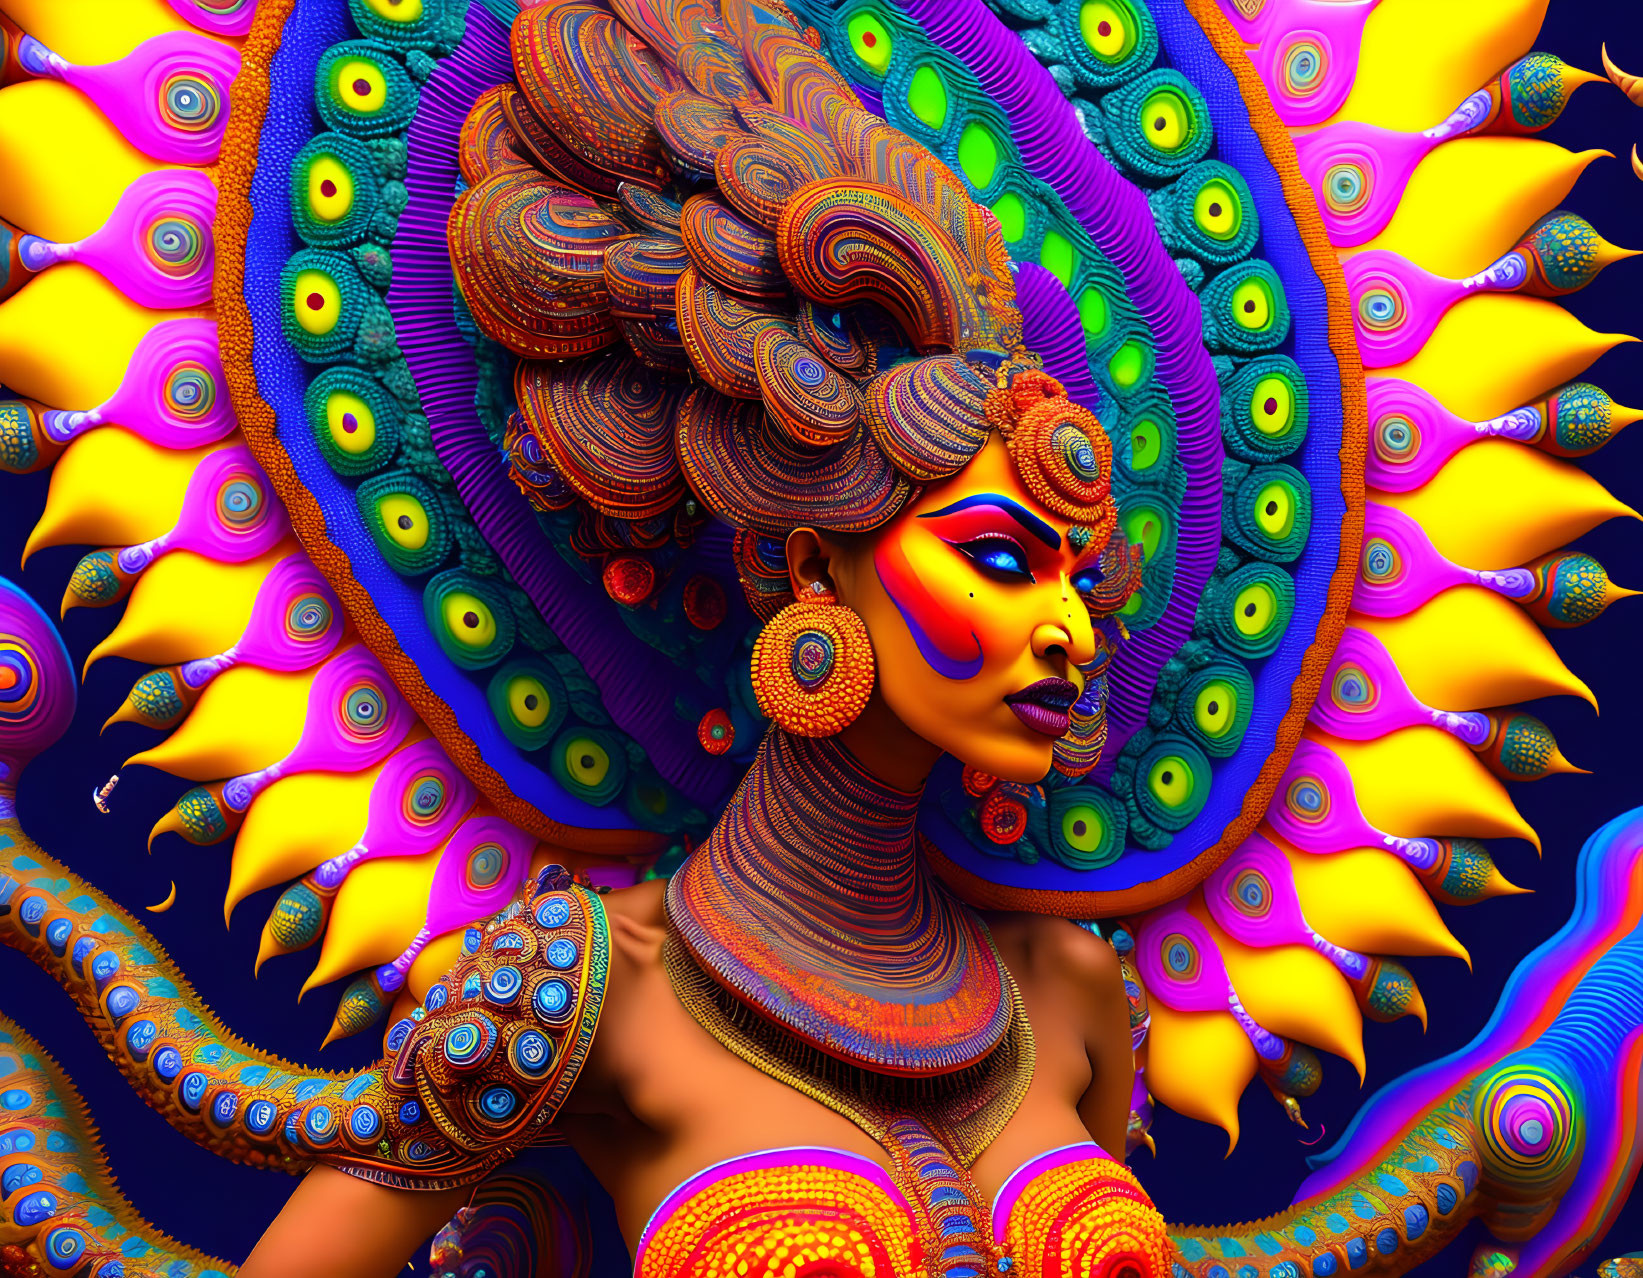 Colorful digital art: Woman with peacock feather hair and jewelry on psychedelic backdrop